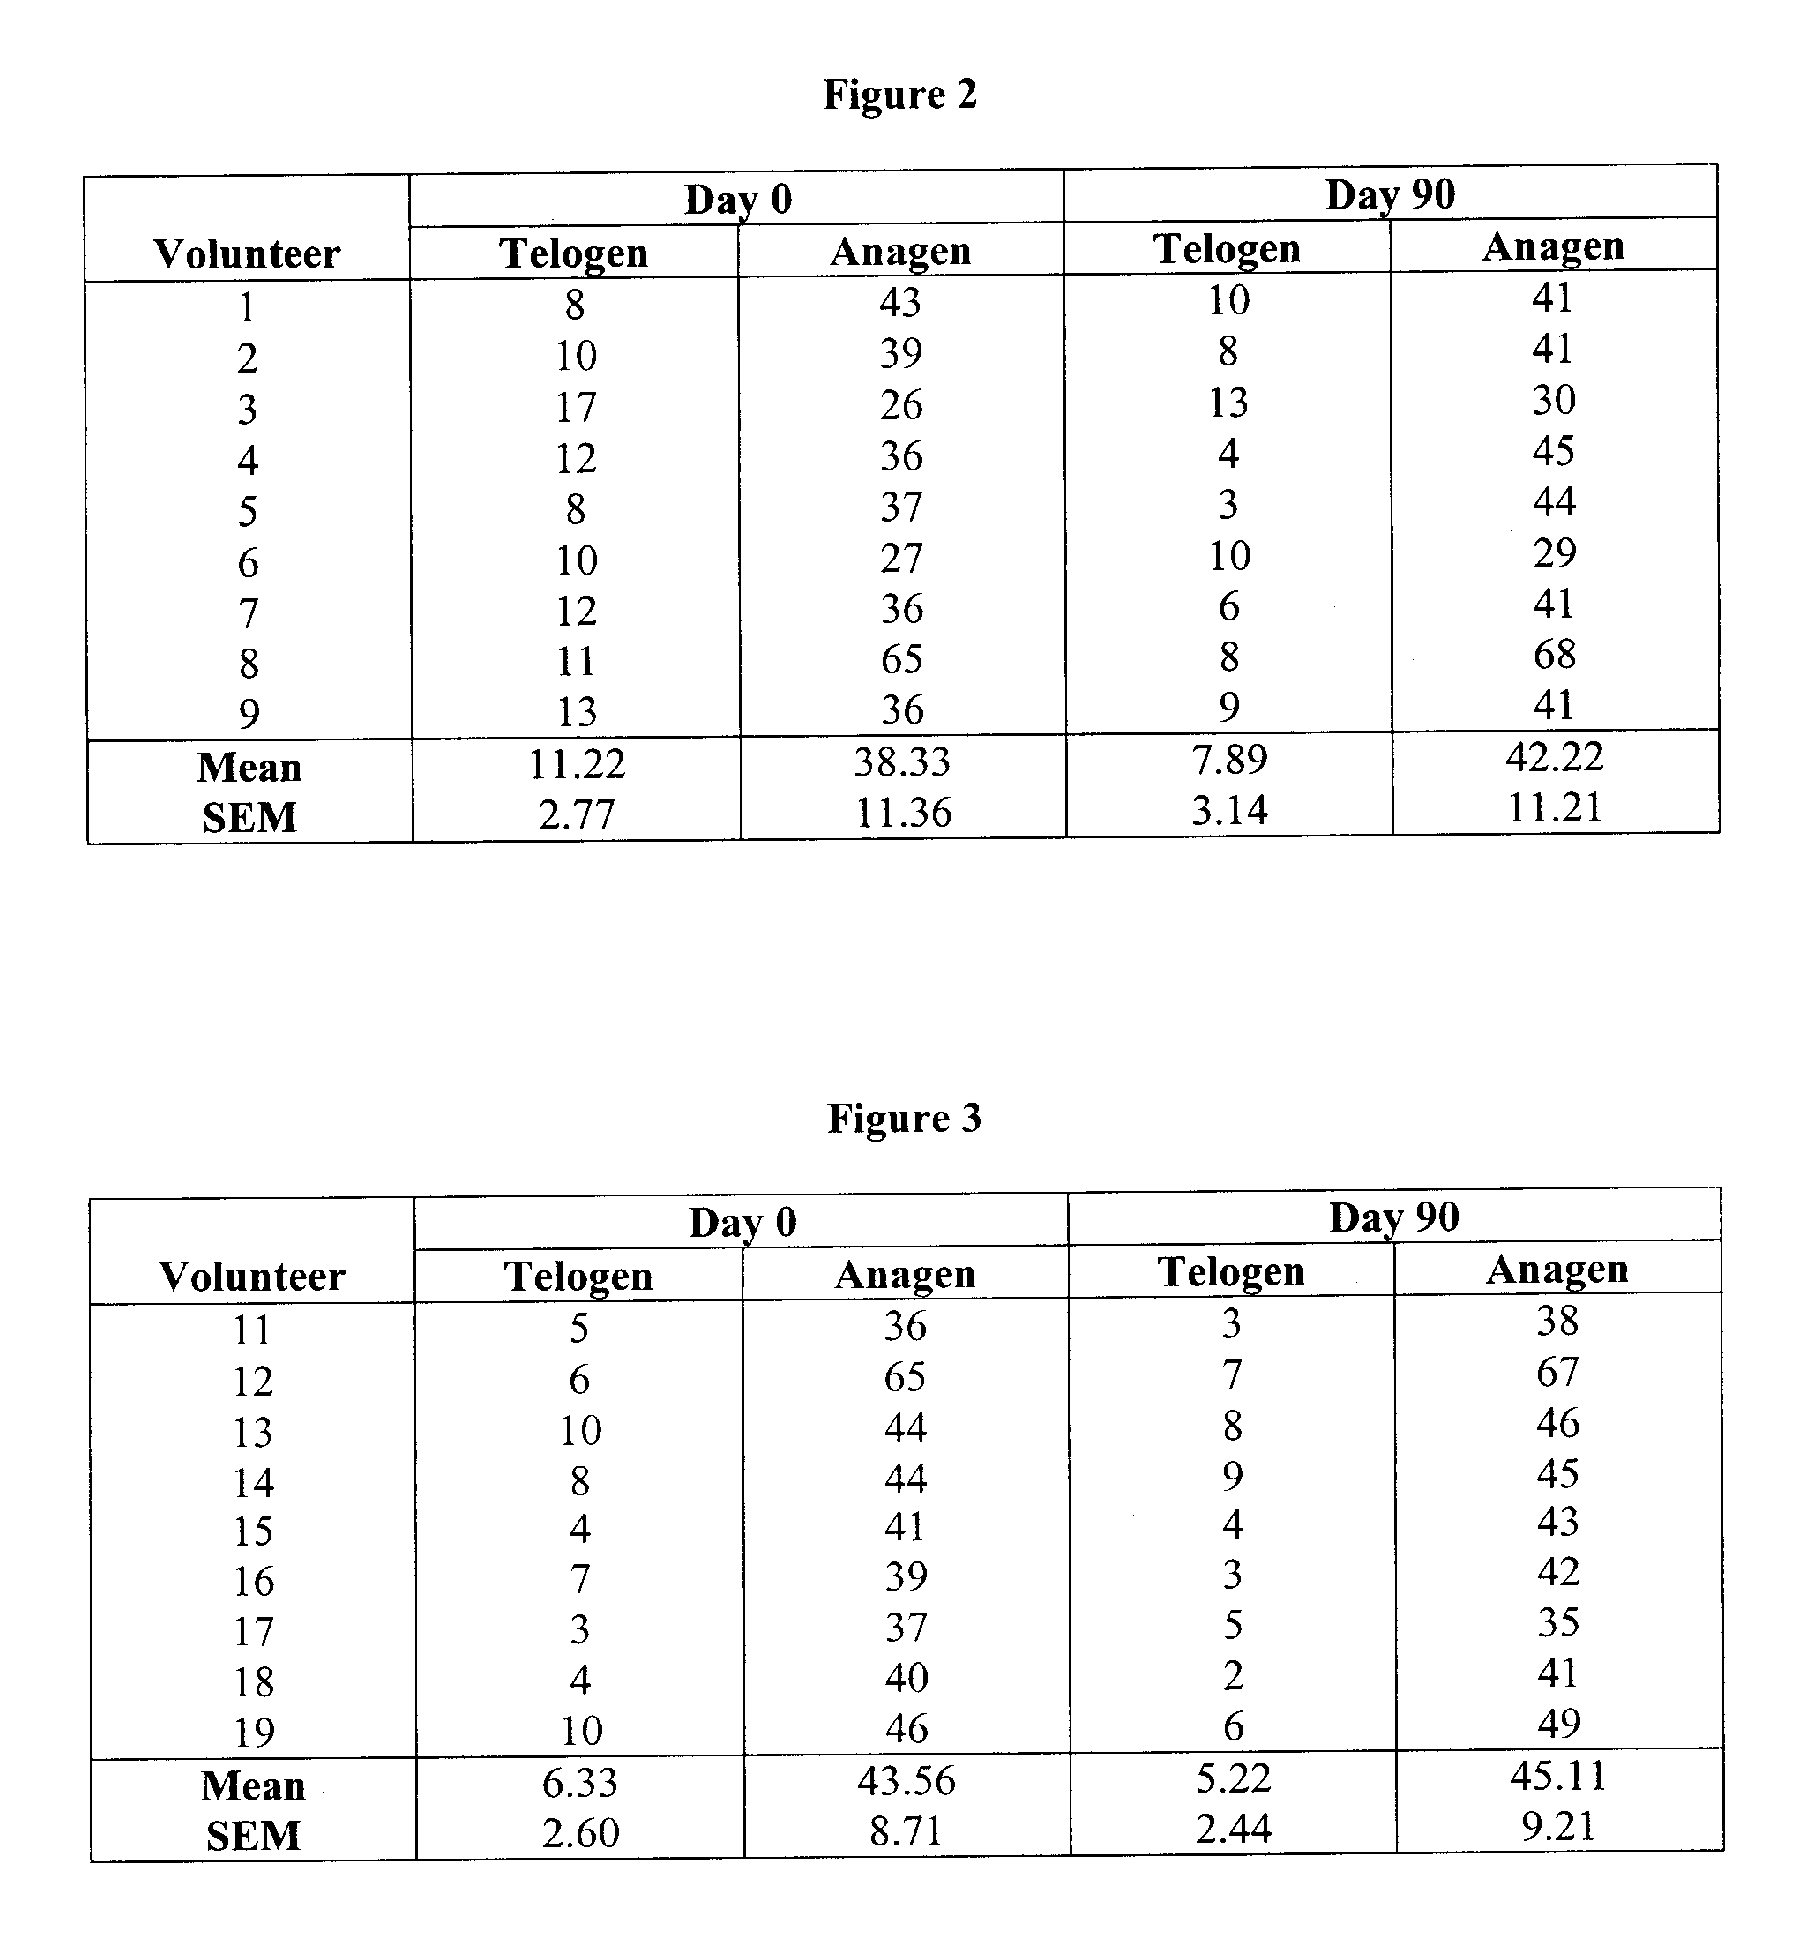 Composition and method to promote human hair growth